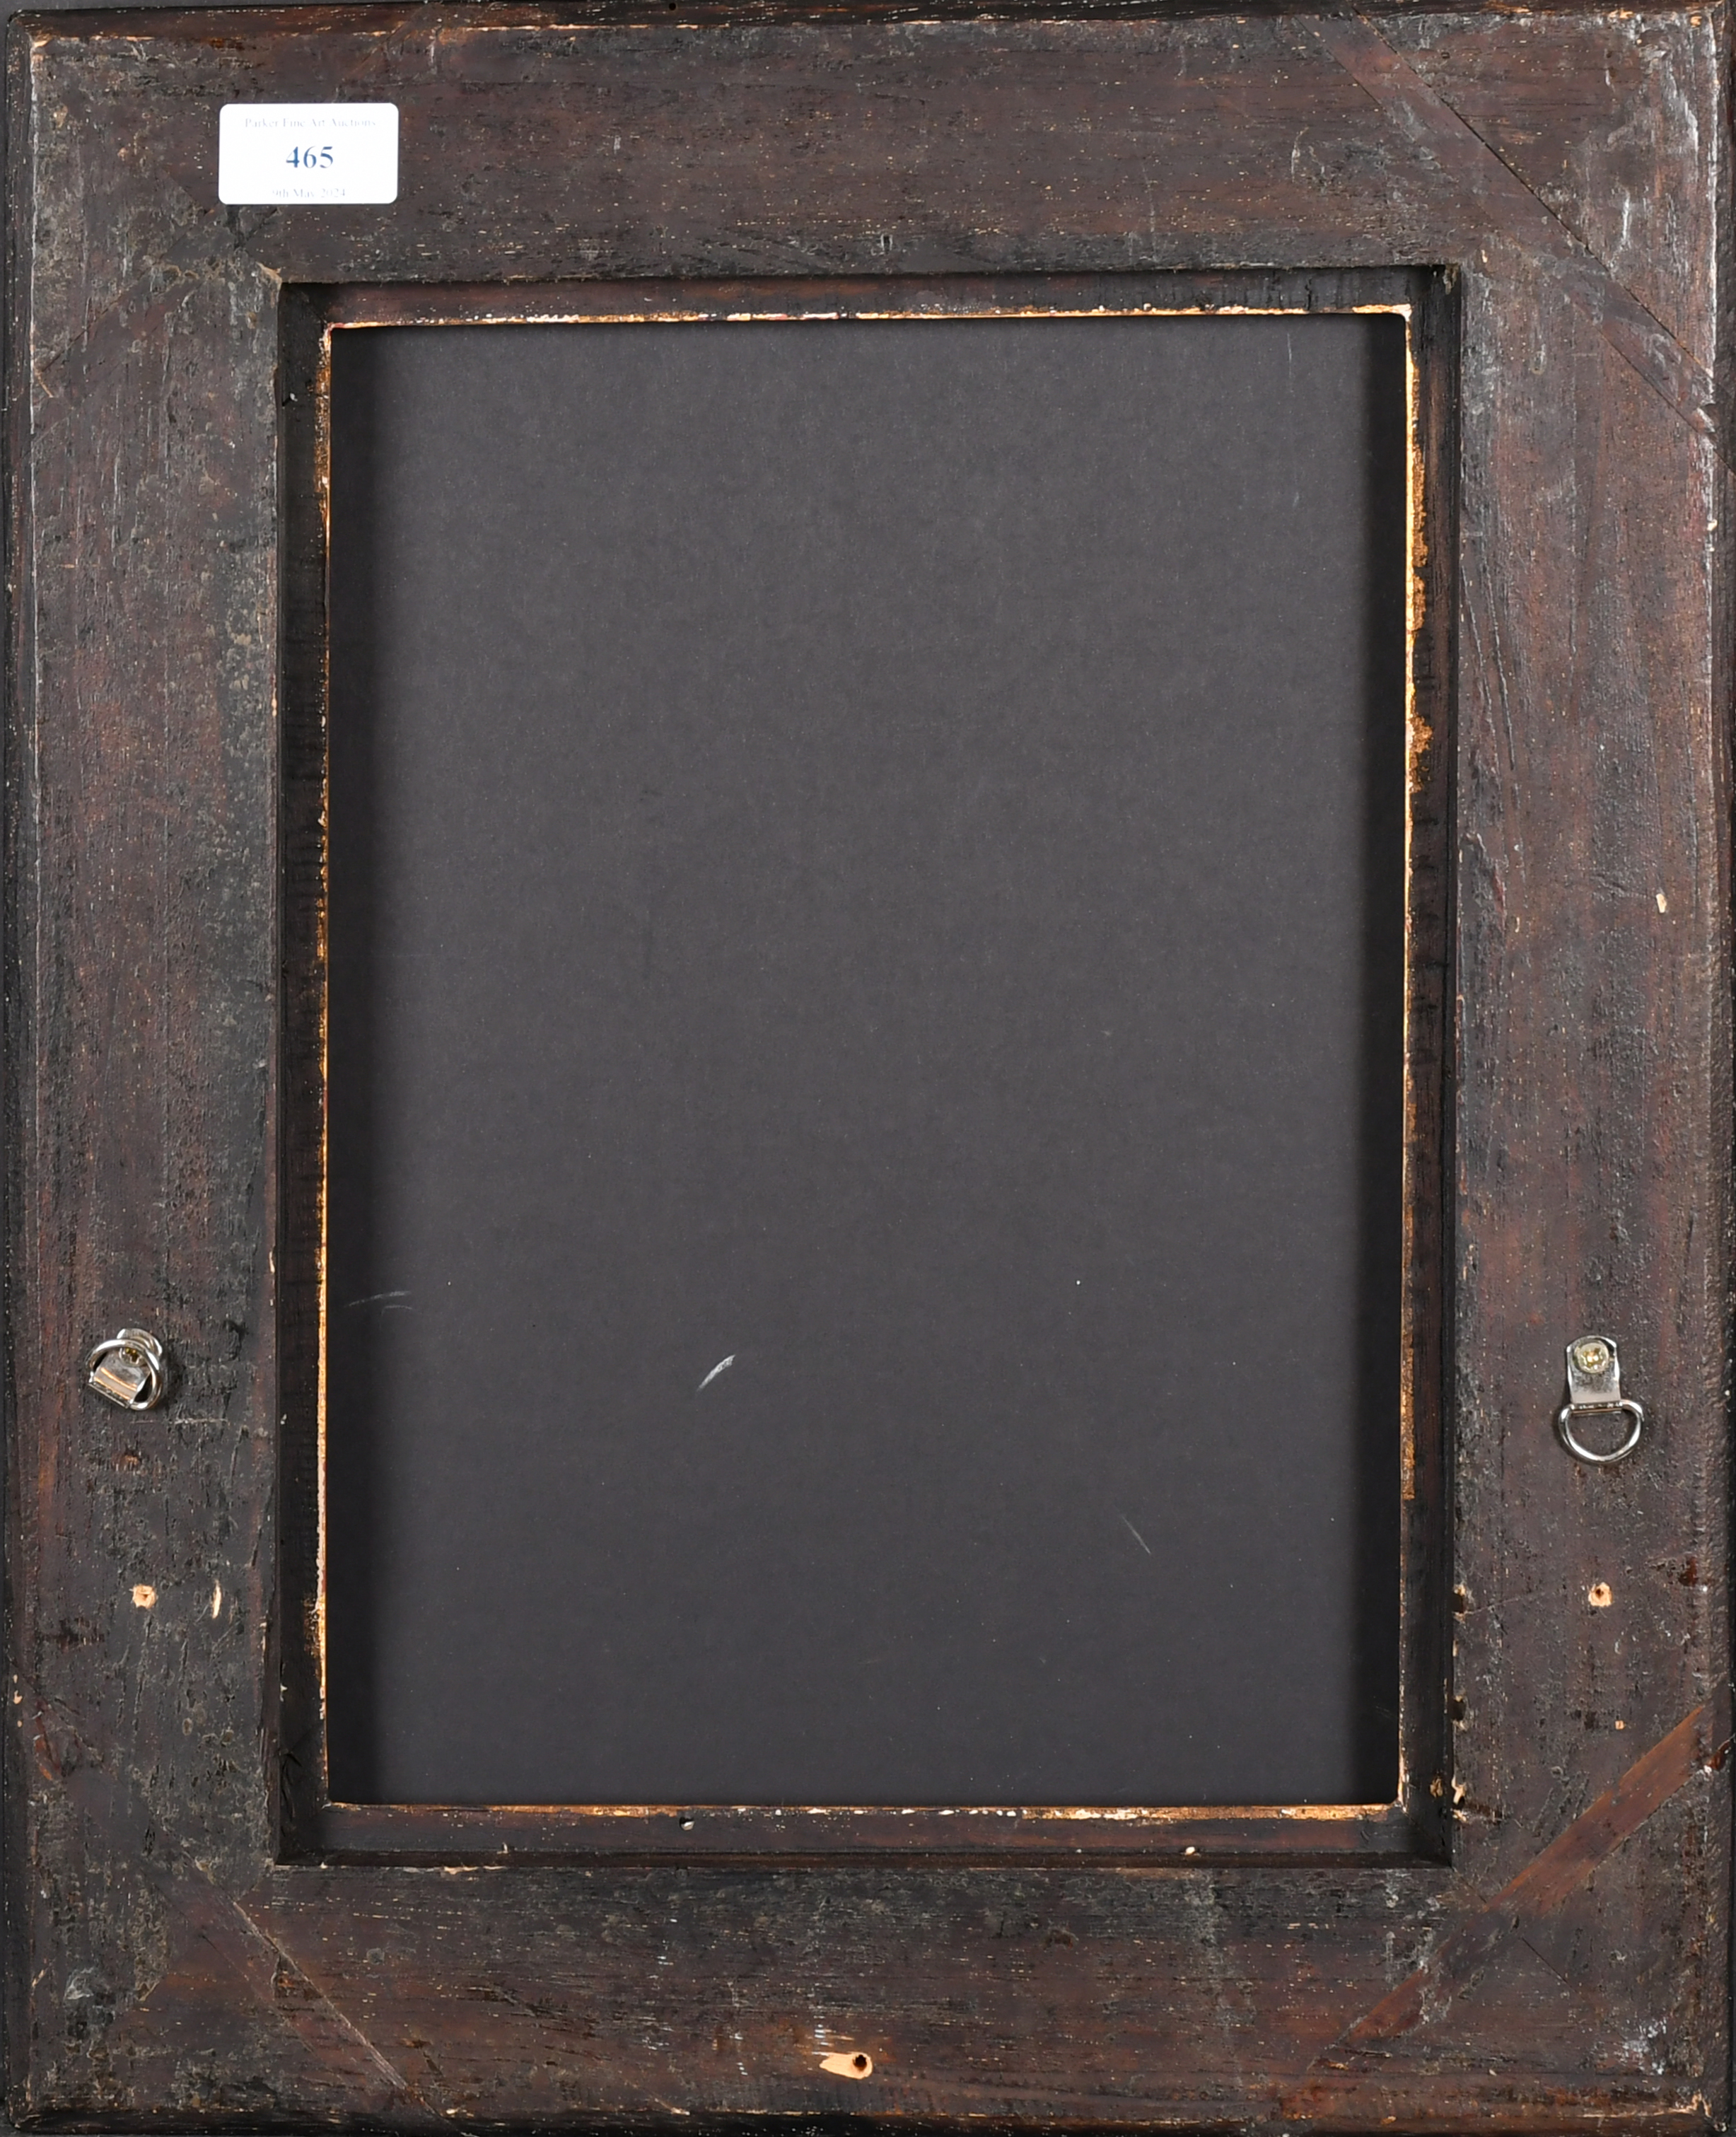 20th Century Italian School. A Black and Gilt Painted Frame, rebate 13.25" x 9.75" (33.6 x 24.7cm) - Image 3 of 3